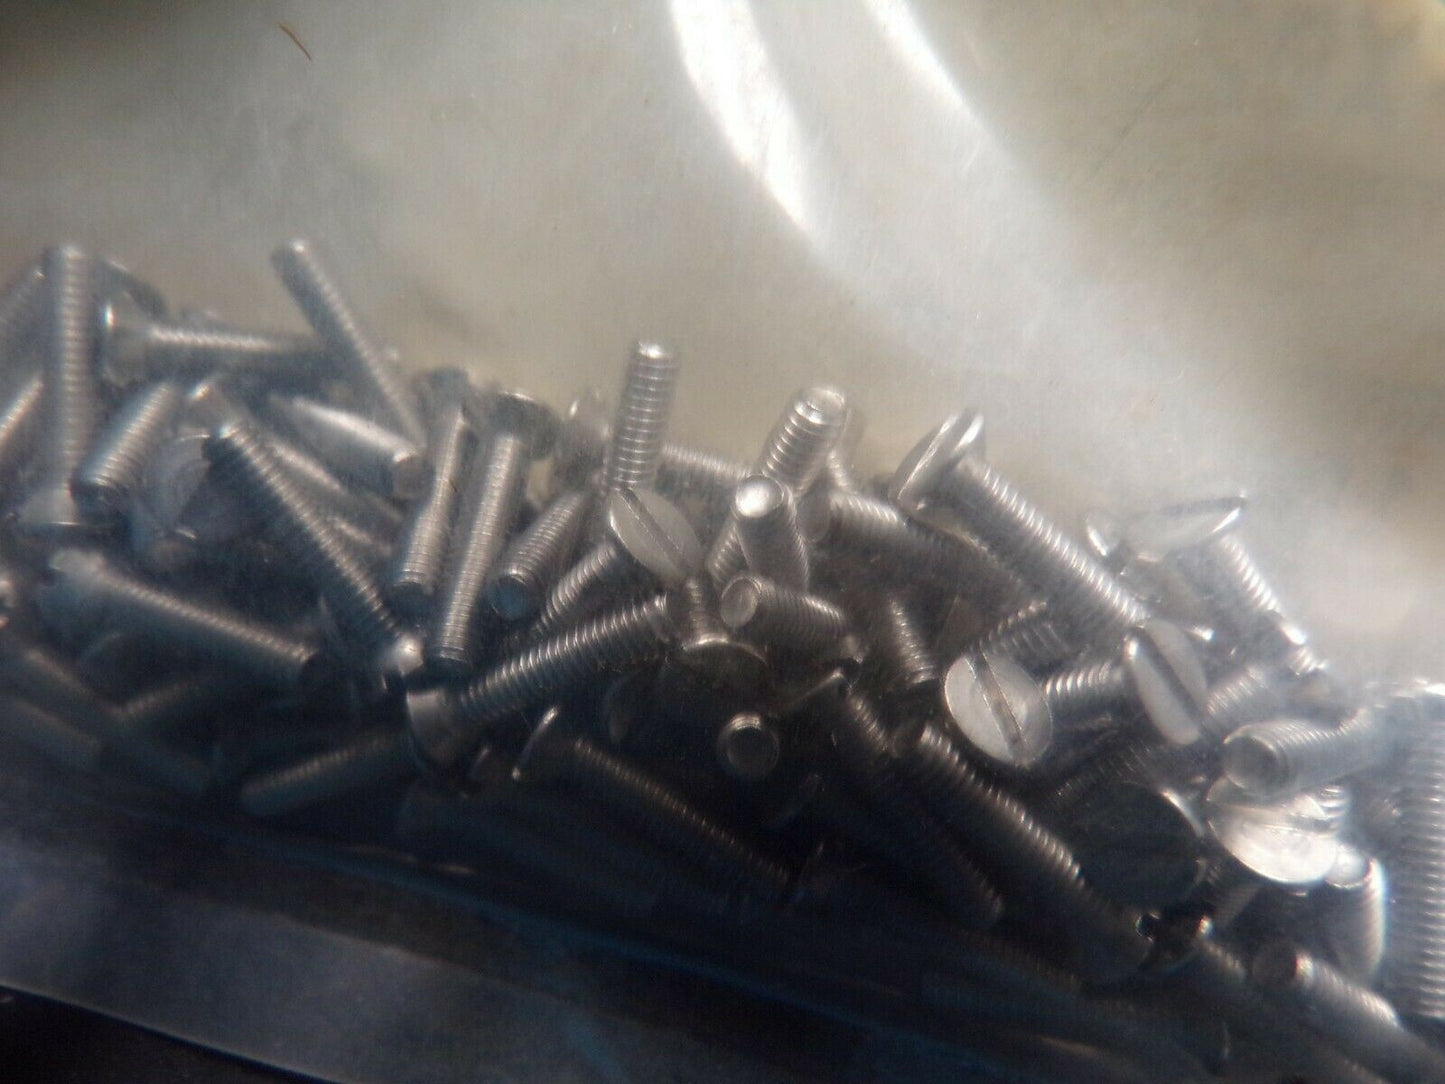 (100) FABORY M2.5-0.45mm Machine Screw Flat Slotted A2 SS Plain 12 mm L 6HE72 (184478874100-BT20(A))